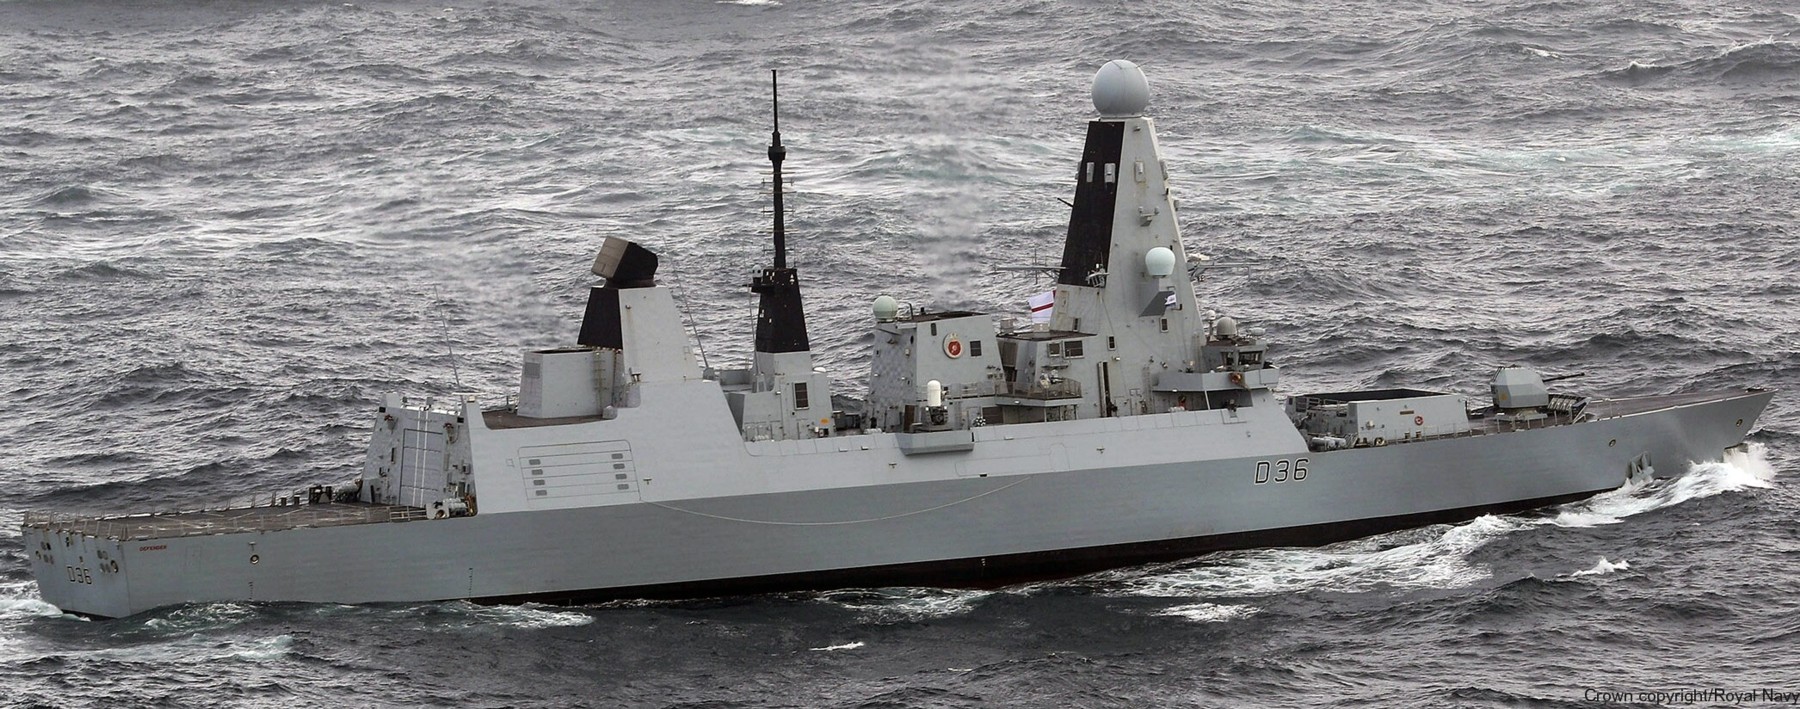 d36 hms defender d-36 type 45 daring class guided missile destroyer ddg royal navy sea viper 23